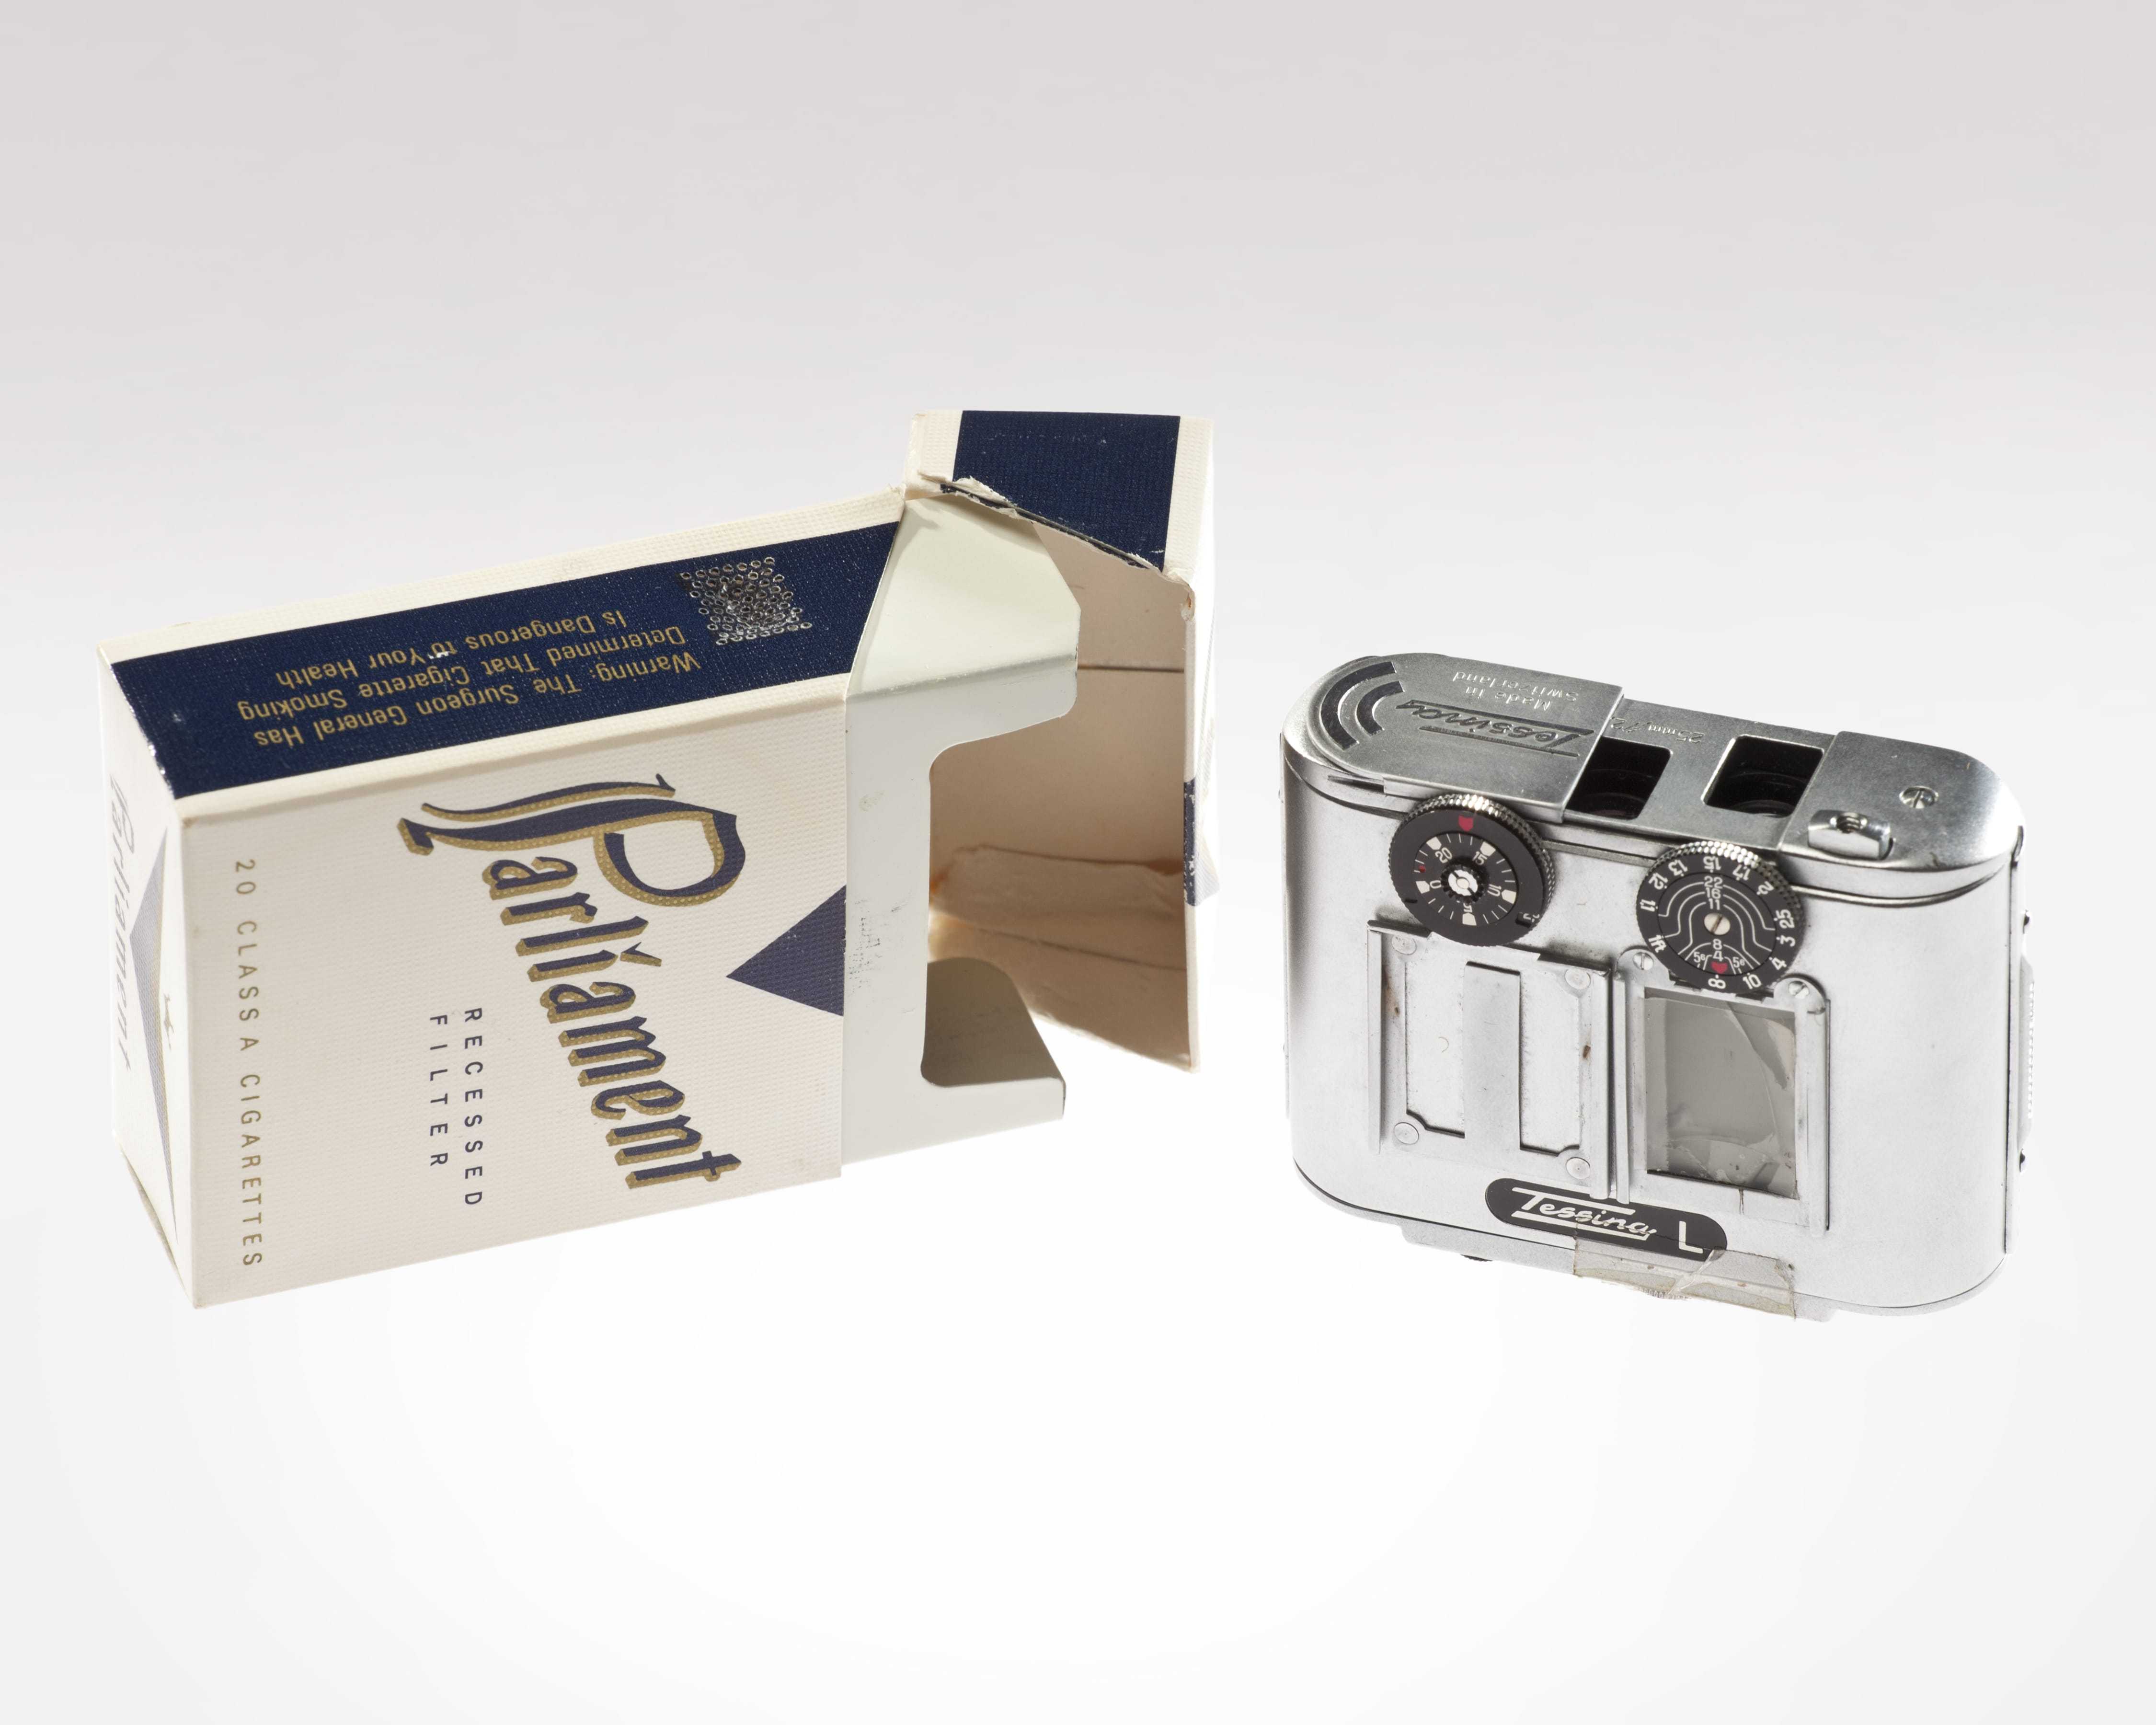 An empty box of Parliament cigarettes next to a smaller film camera with a silver metal exterior